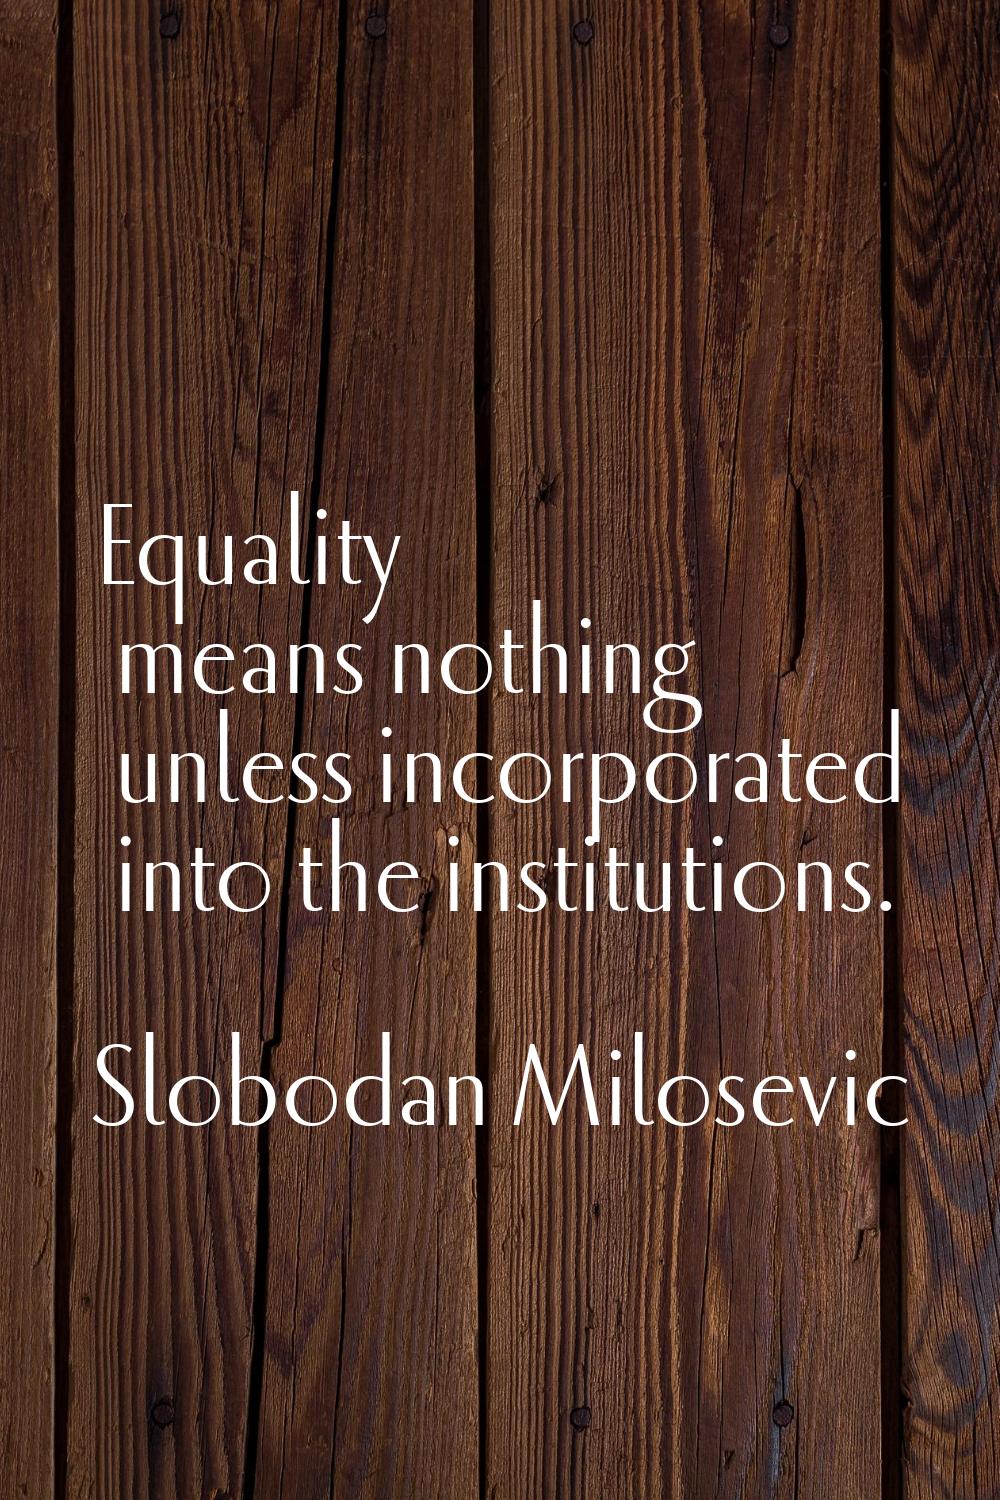 Equality means nothing unless incorporated into the institutions.